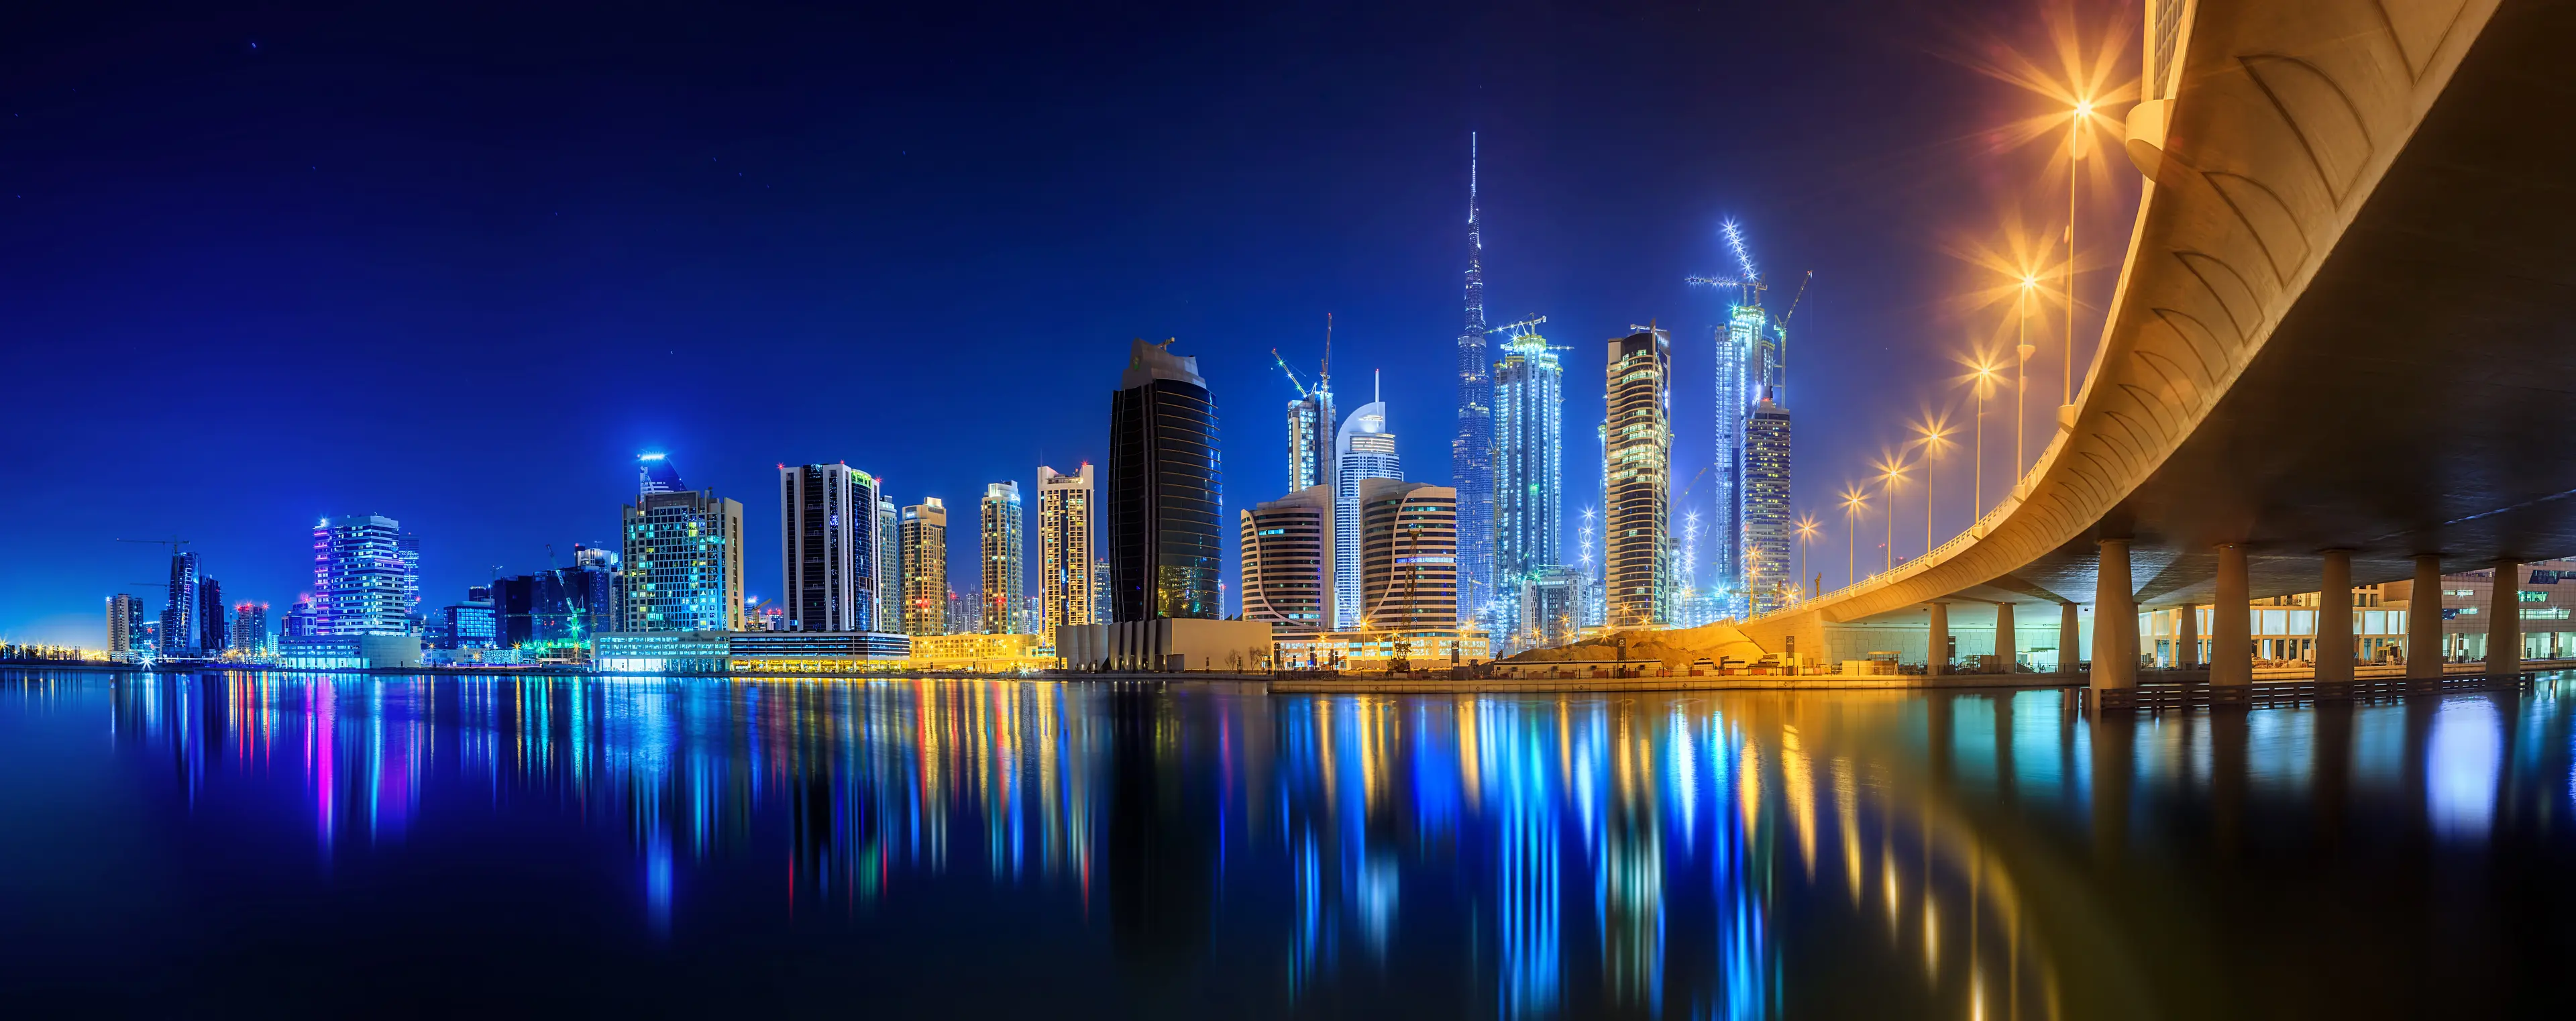 3-Day Local Experience of Dubai: Shopping and Sightseeing with Friends